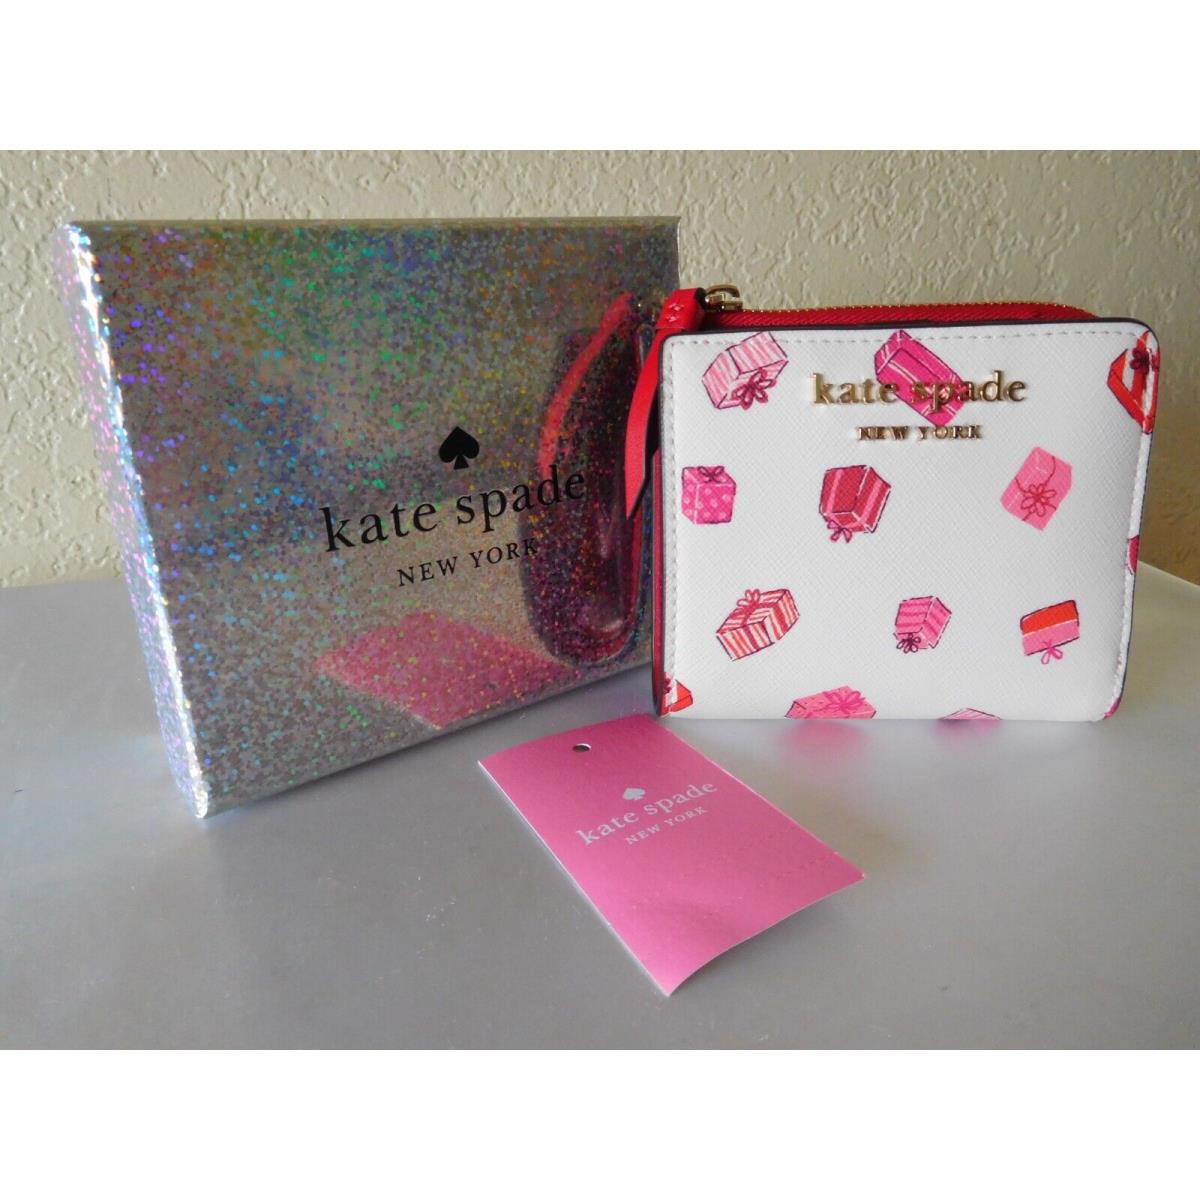 Kate spade wallet in a gift box 